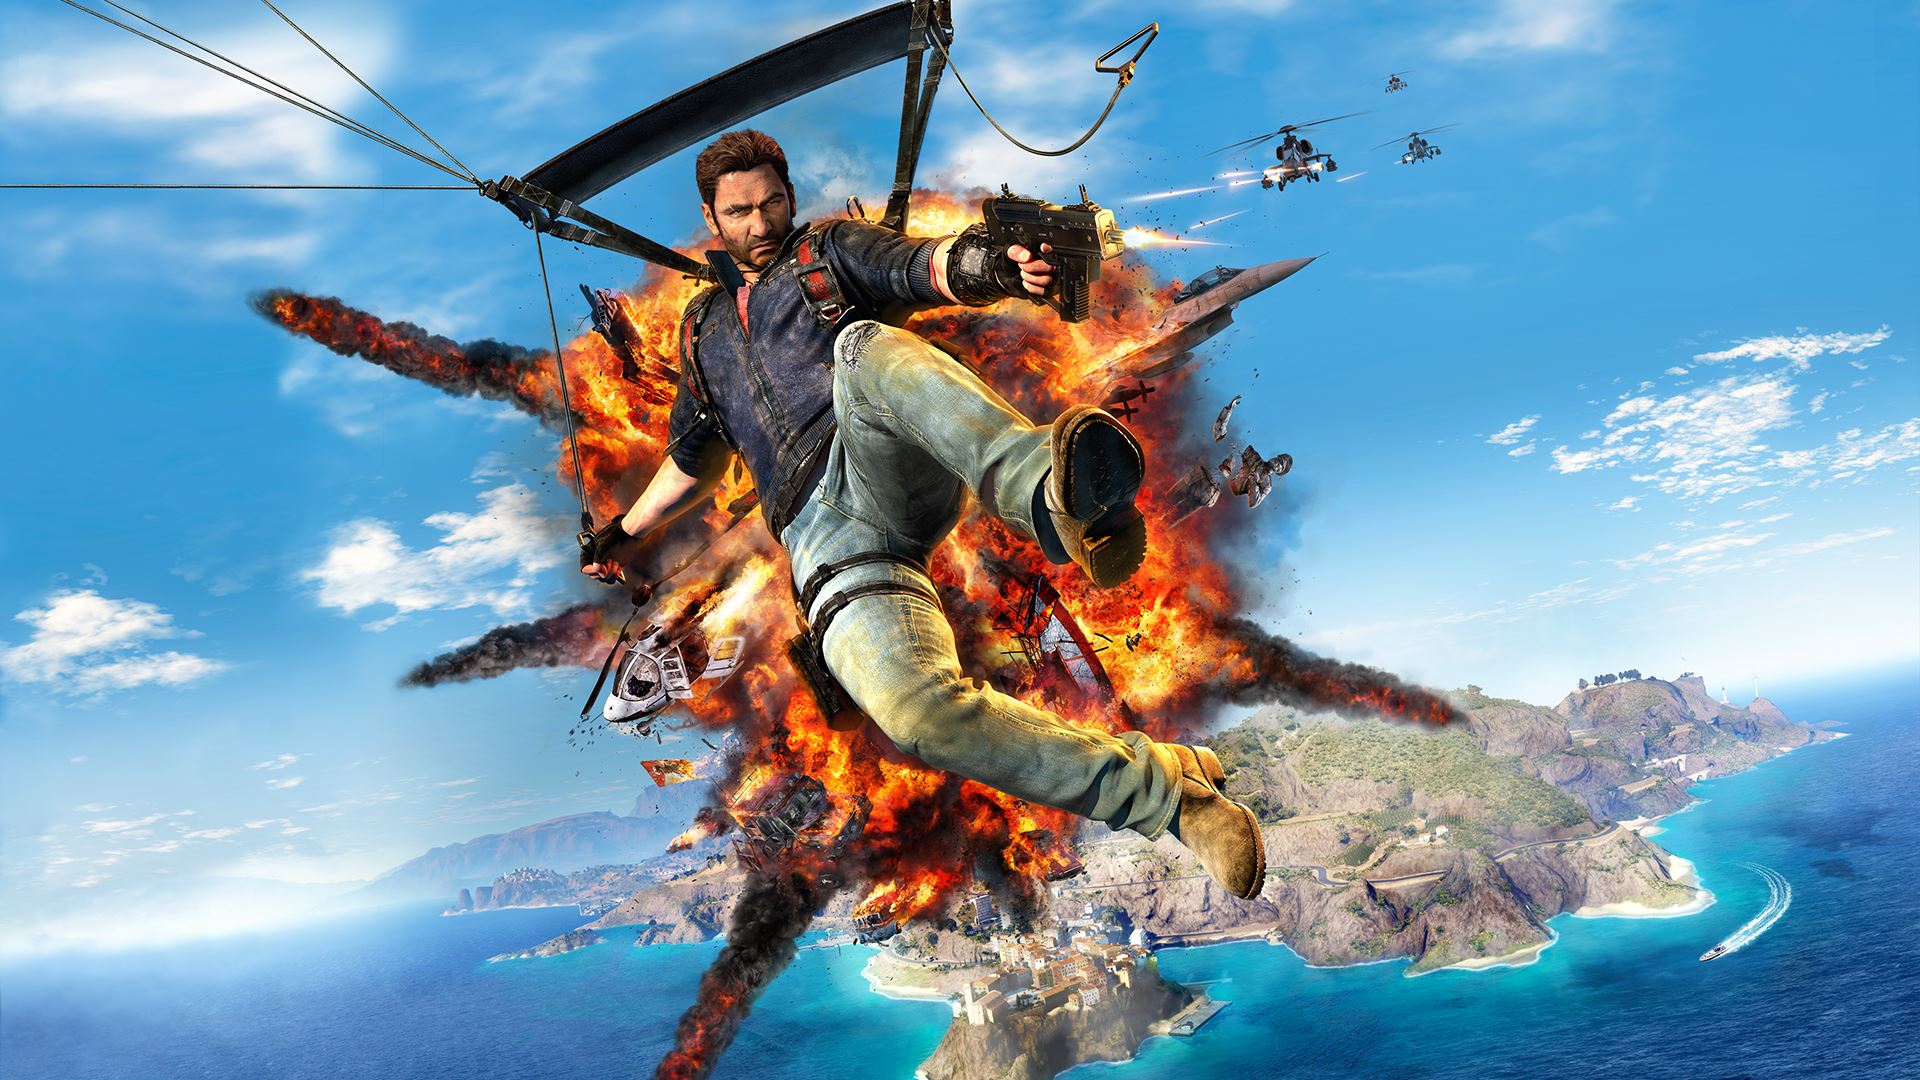 20 Years Later, Just Cause Is Getting a Movie